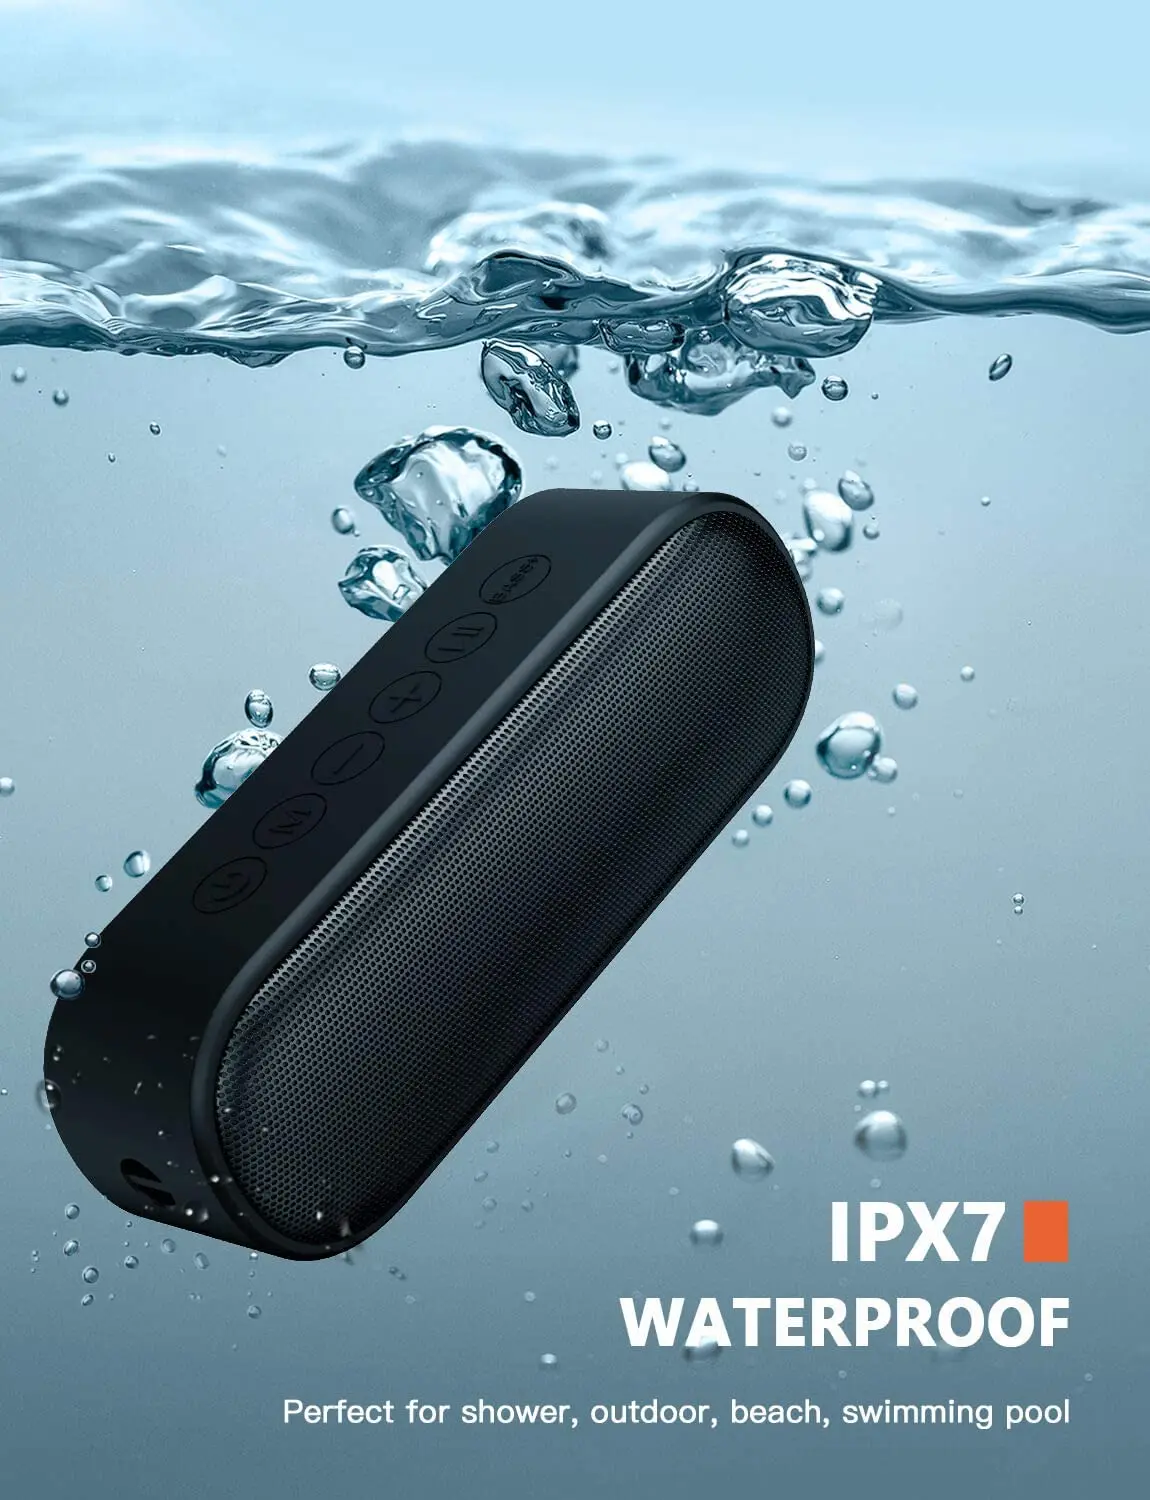 LENRUE Portable Wireless Bluetooth Speaker with 14W HD Sound IPX7 Waterproof Speakers , Rich Bass, Built-in Mic for Sellphone